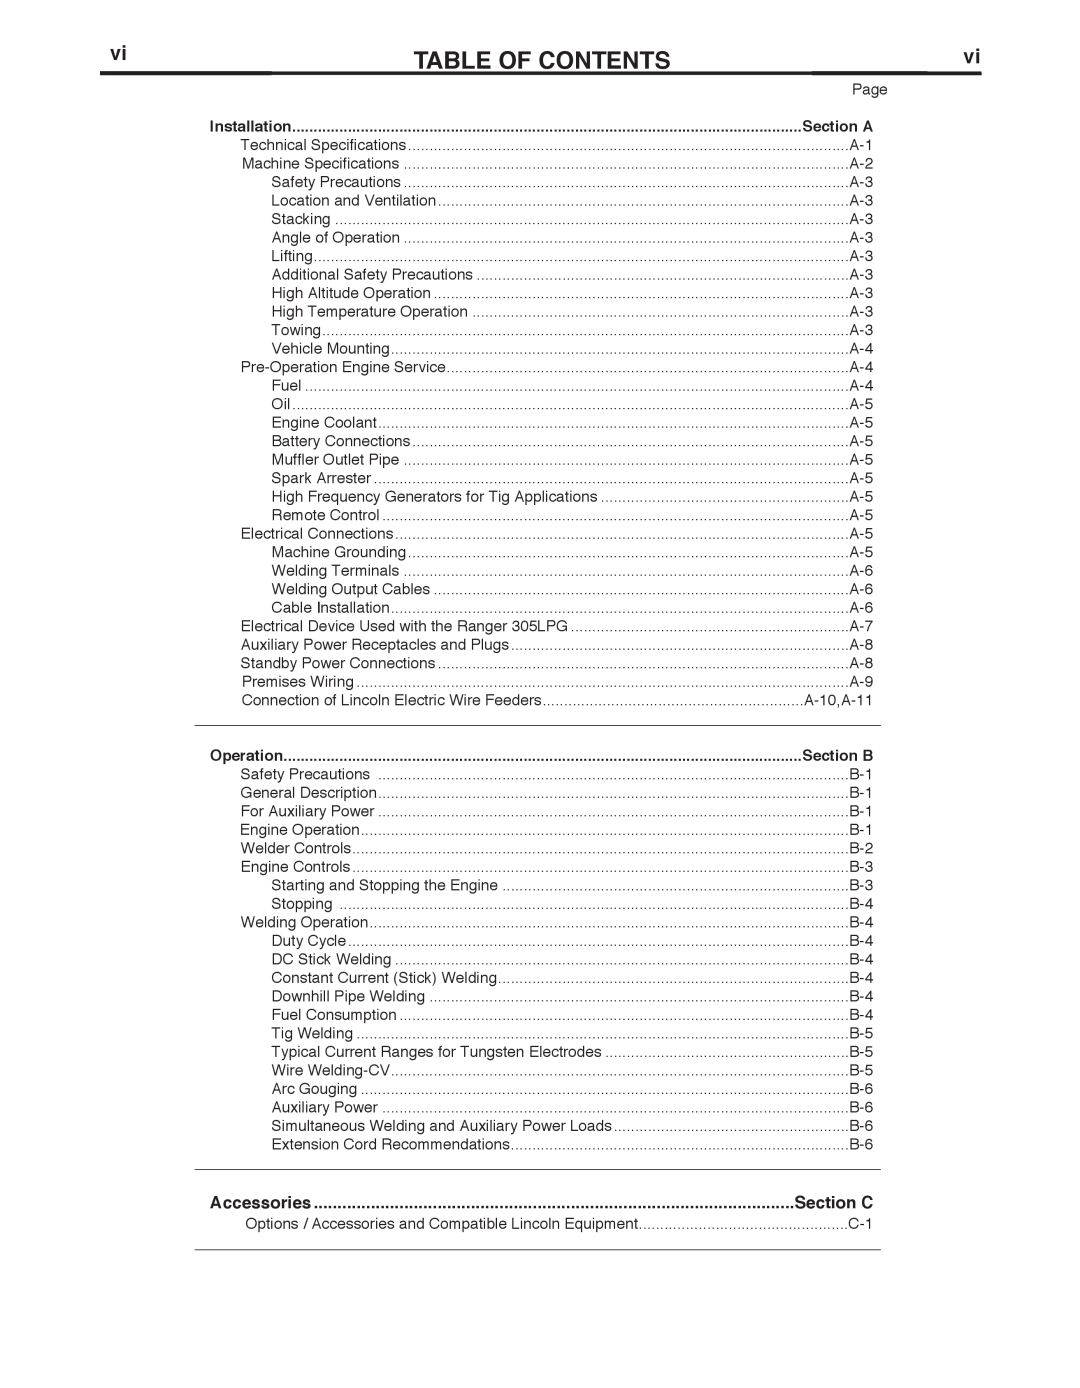 Lincoln Electric IM10043-A manual TAbLE OF CONTENTS, Section C, Installation, Section A, Operation, Section b, Accessories 